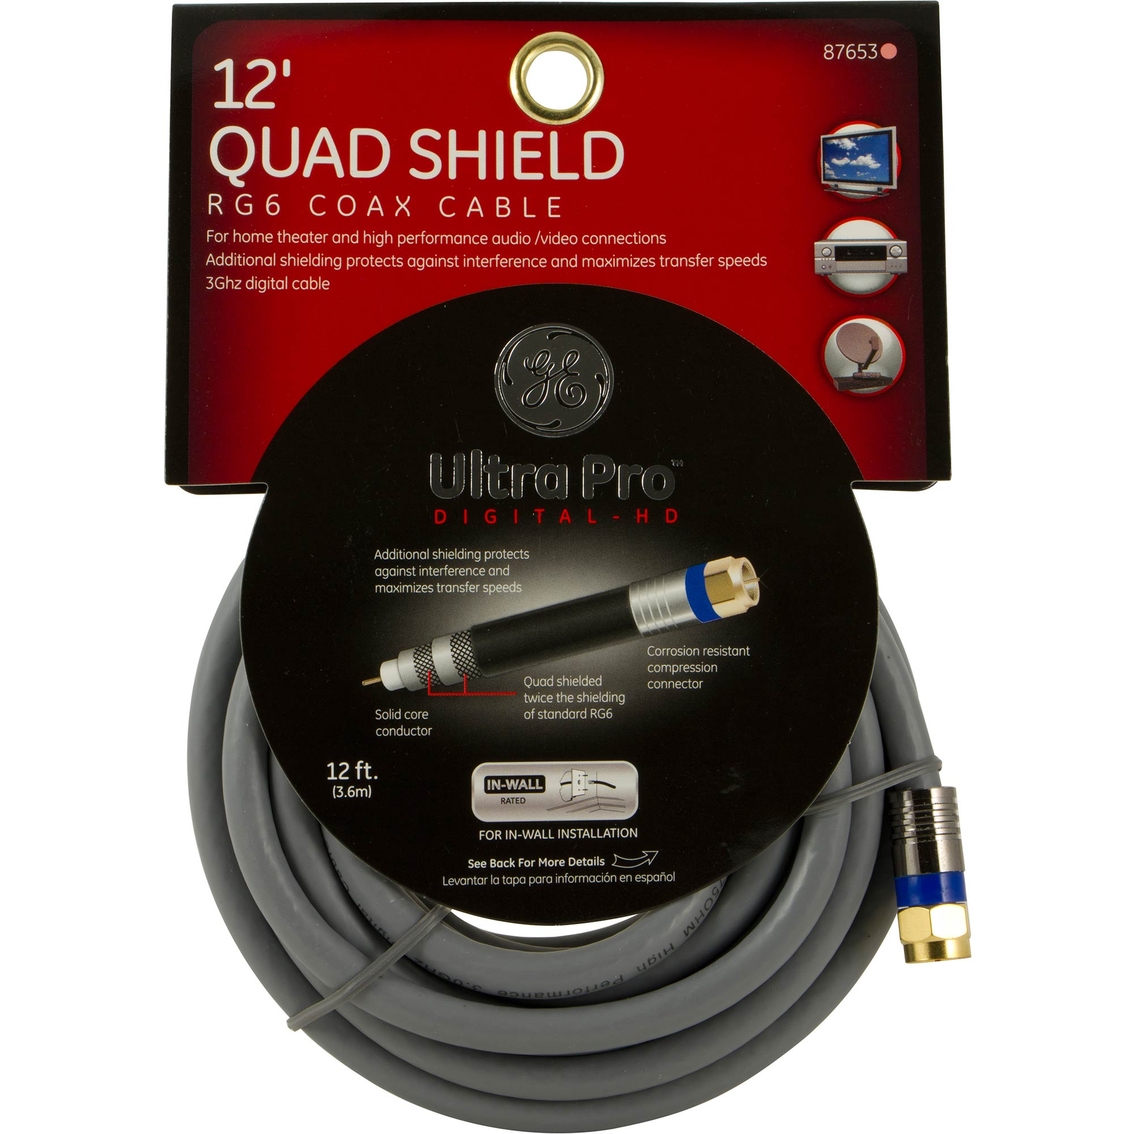 GE 15 ft. Ultra Pro Series RG6 Quad Shield Coax Cable - Image 2 of 2